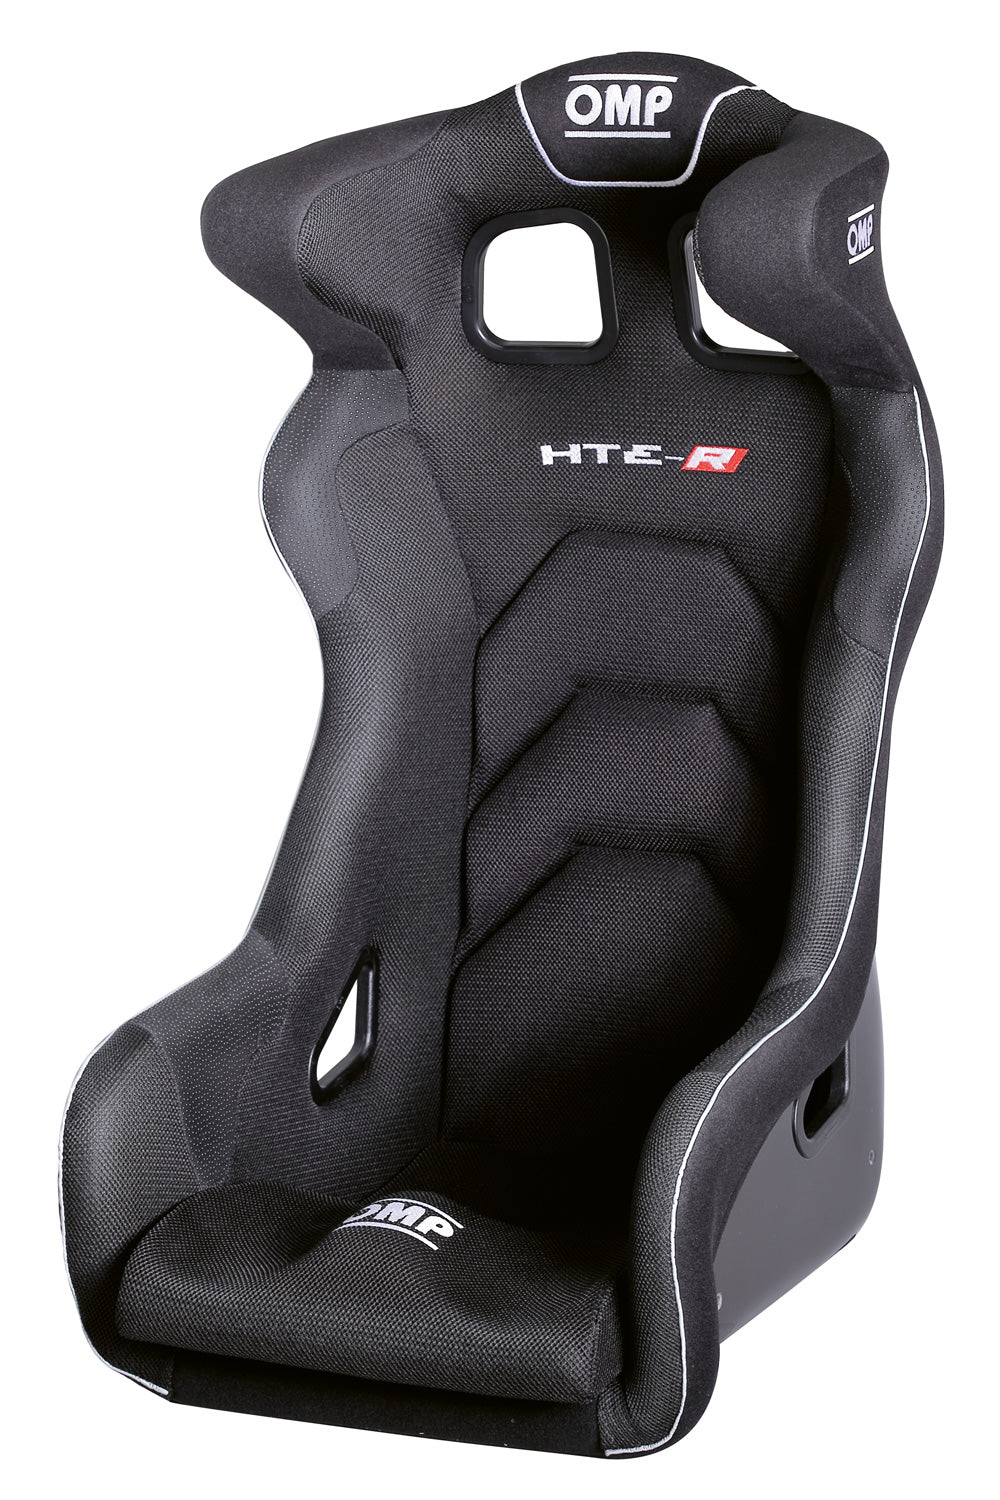 OMP racing seat HTE-R 400